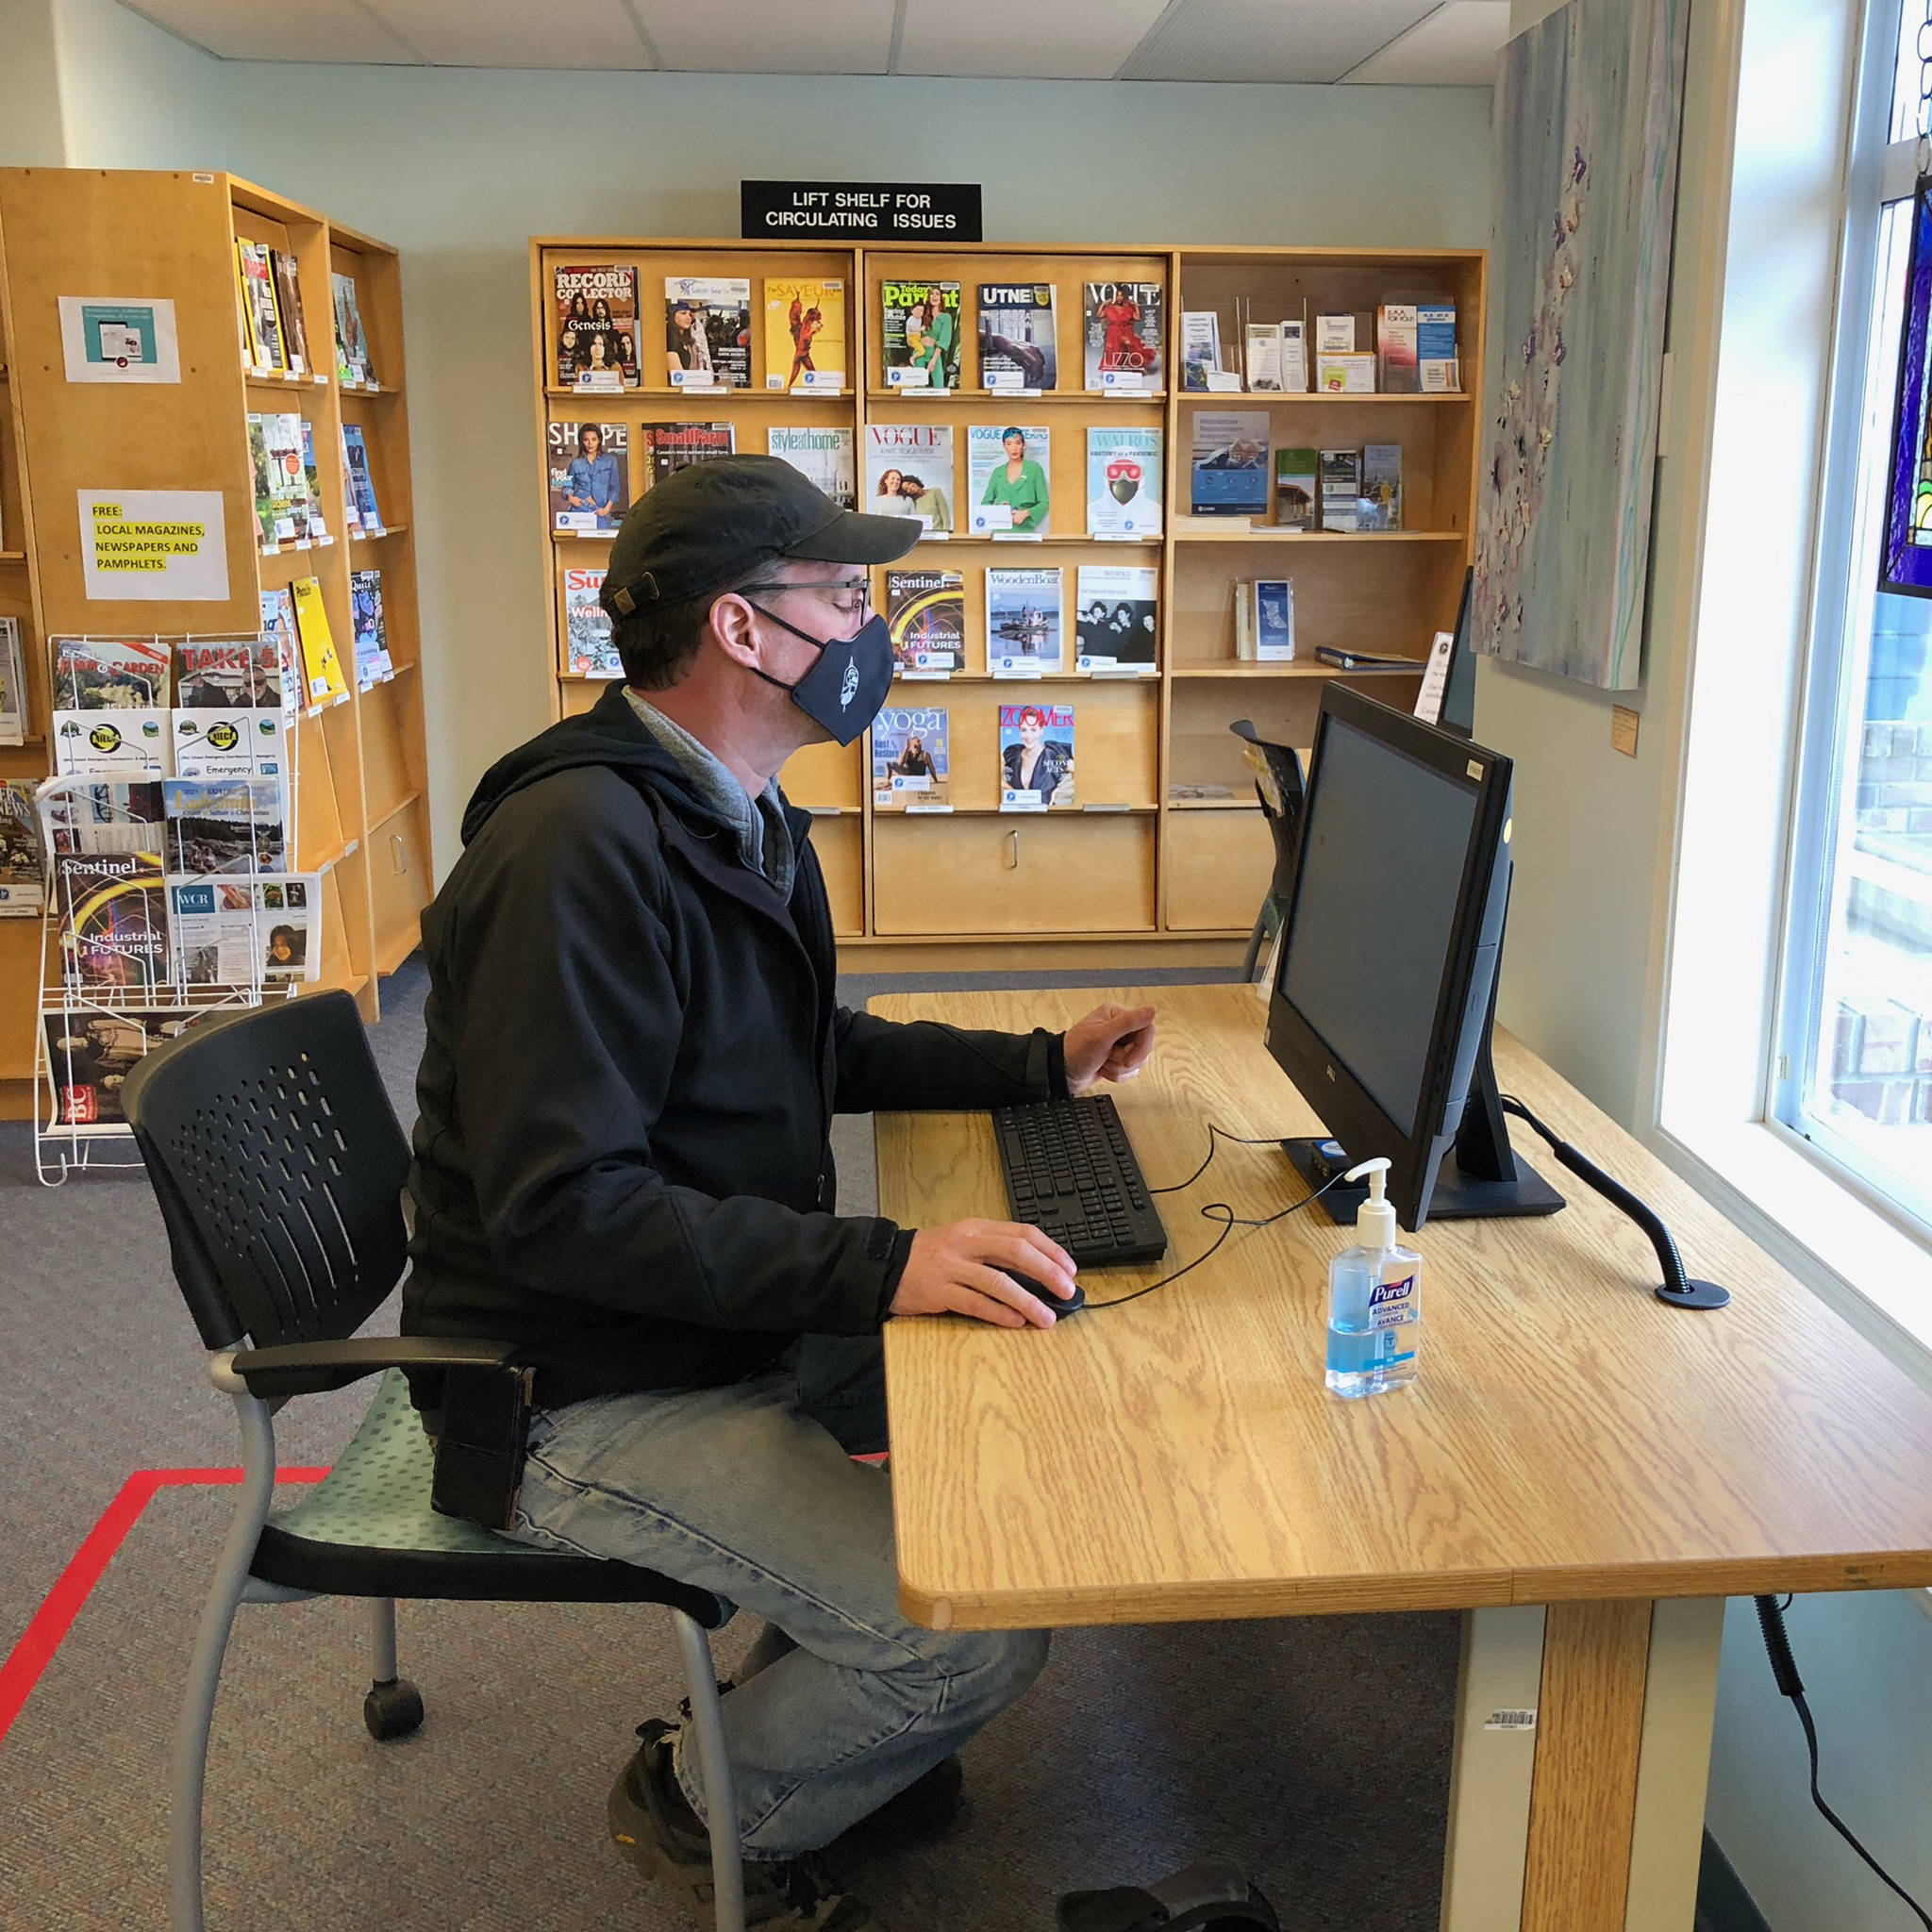 The Vancouver Island Regional Library in Ladysmith was one of the only warm places Manly could go. (Paul Manly photo)